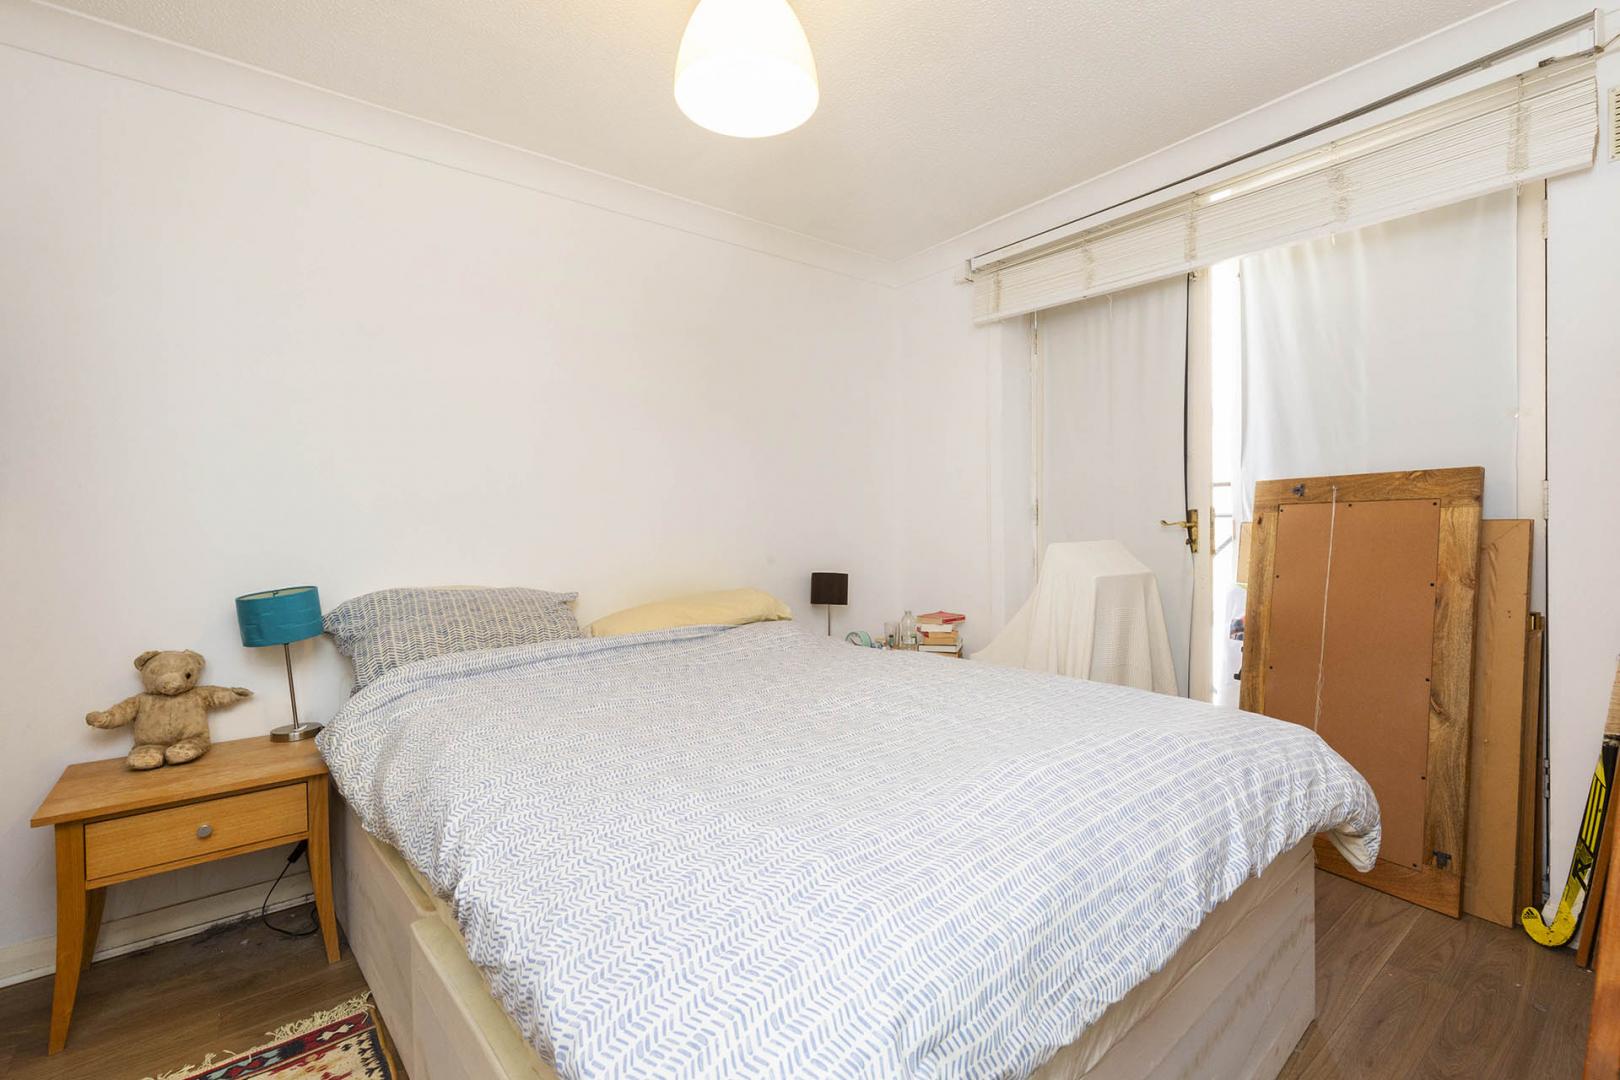 Good size one bed with a modern kitchen and tiled bathroom mins to tube Cornwallis Square, Archway